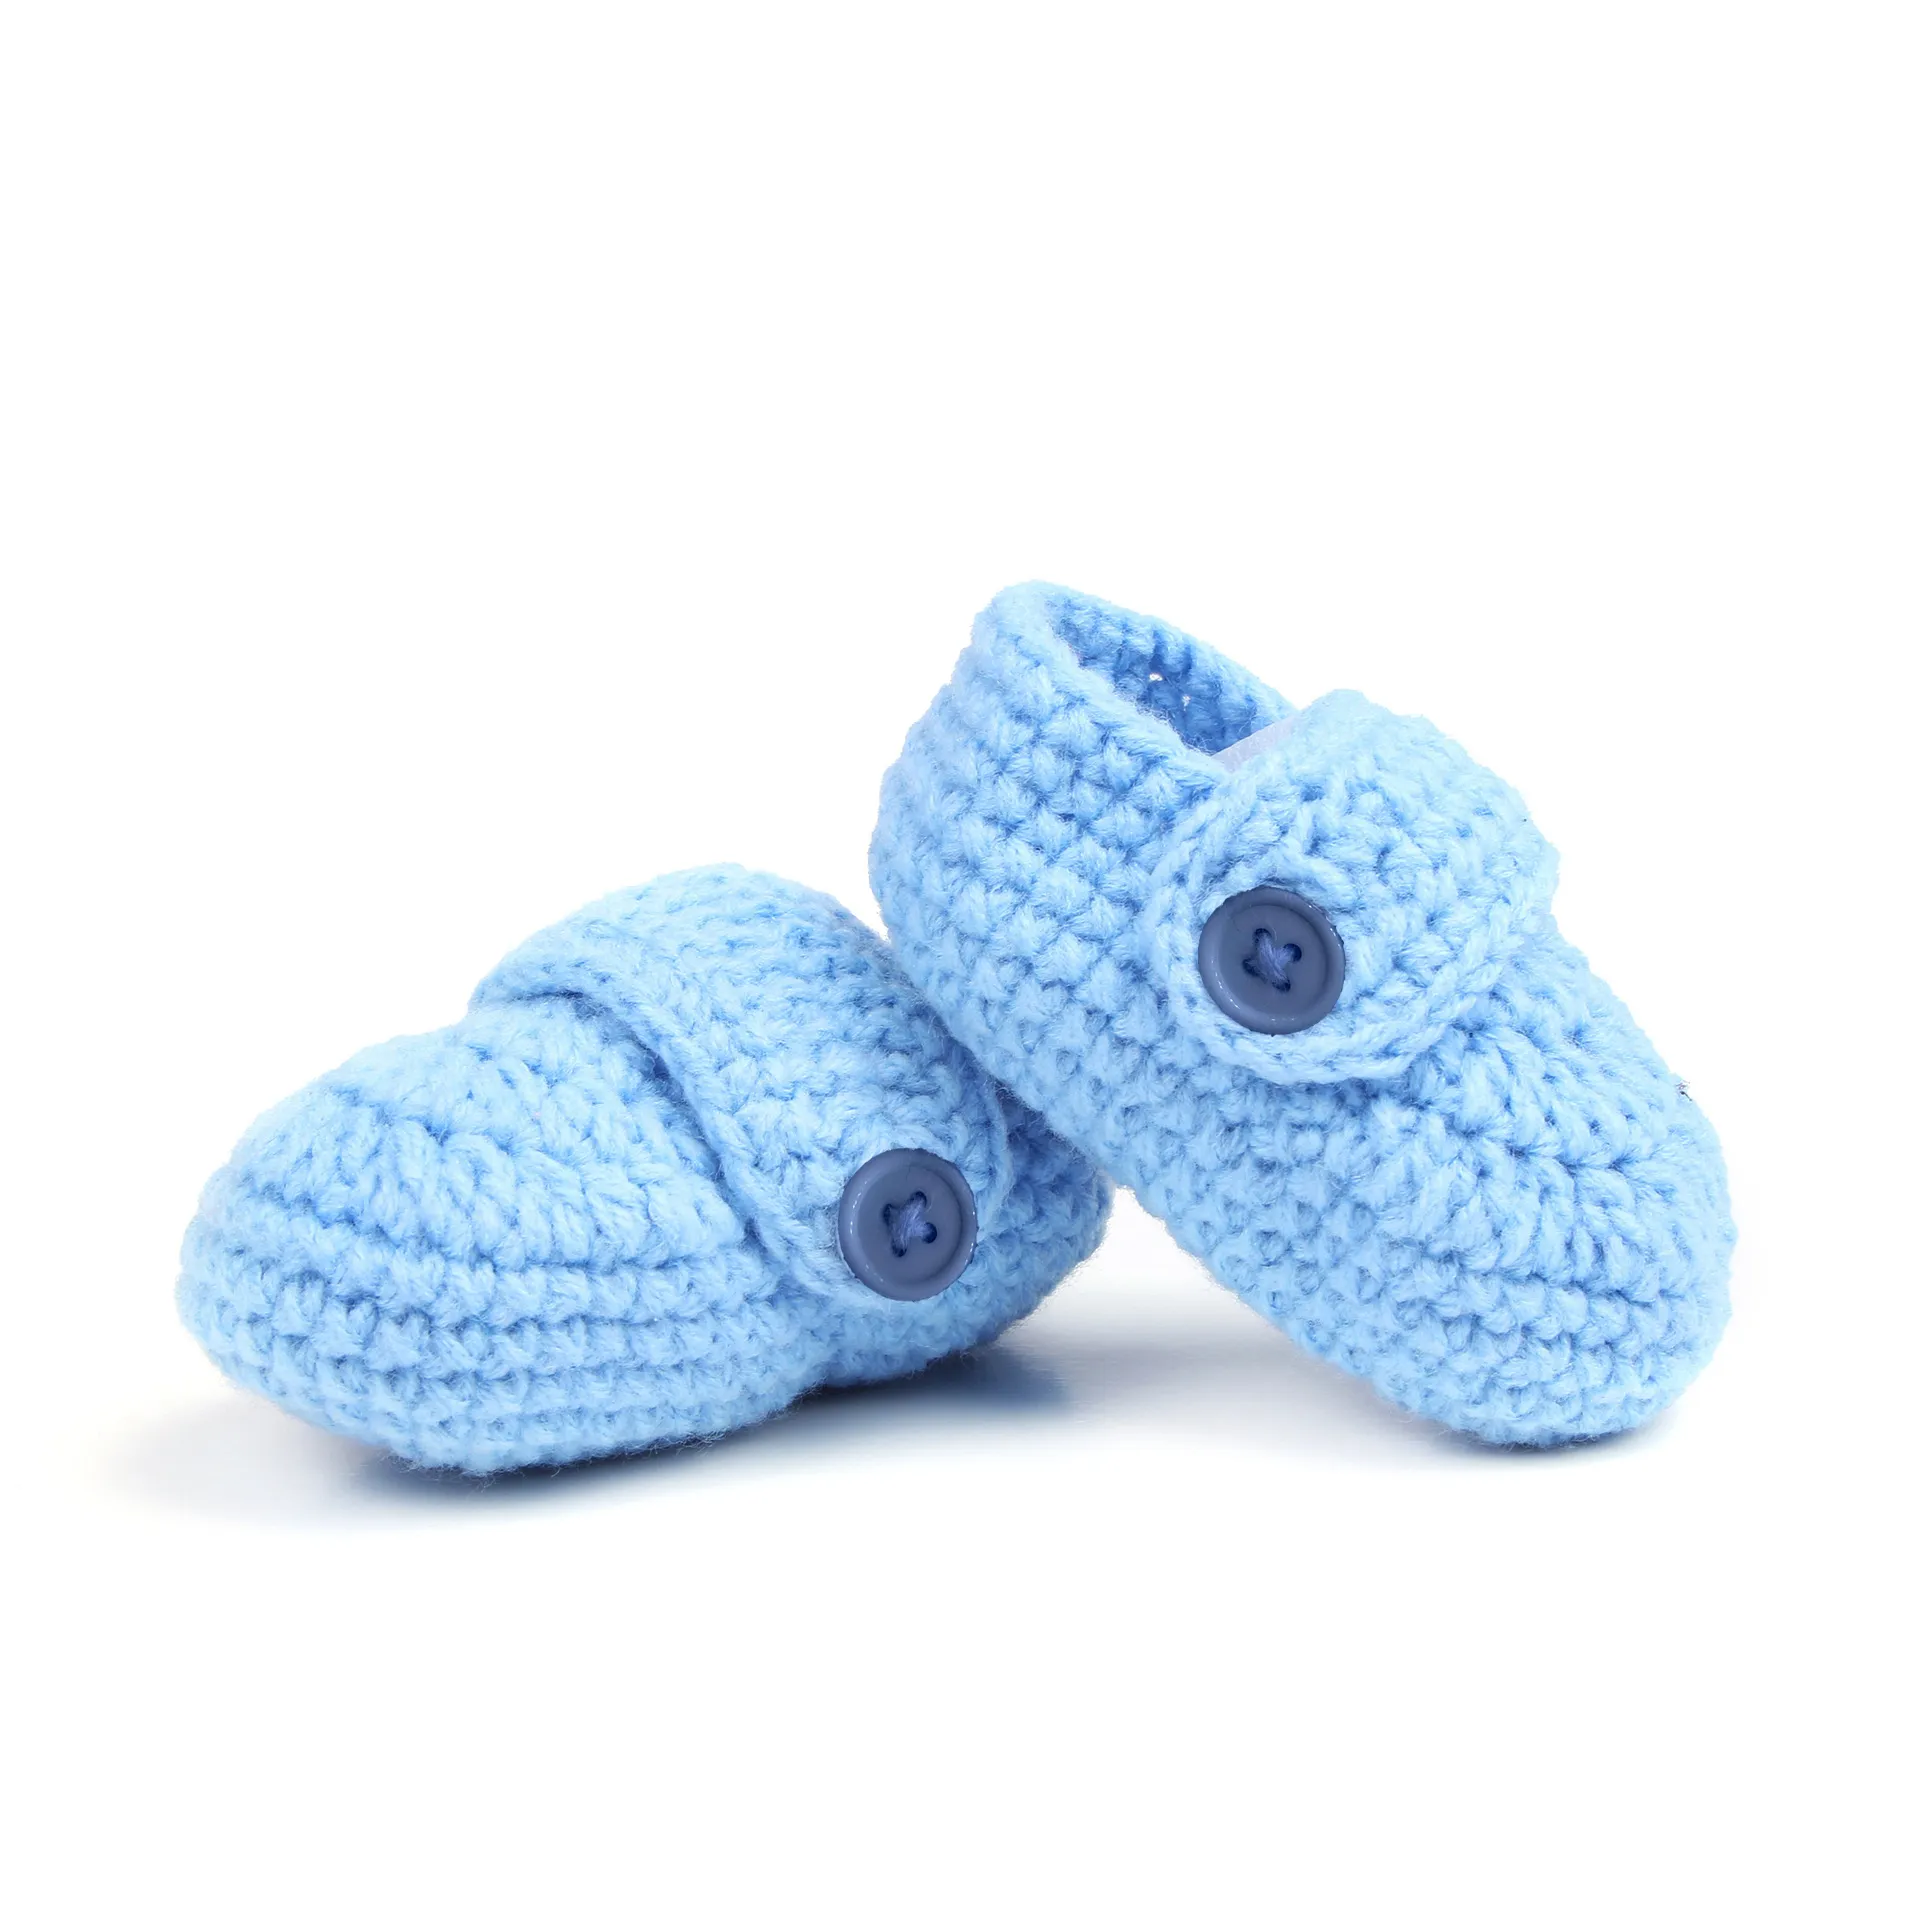 Baby's Hand knitted wool socks product